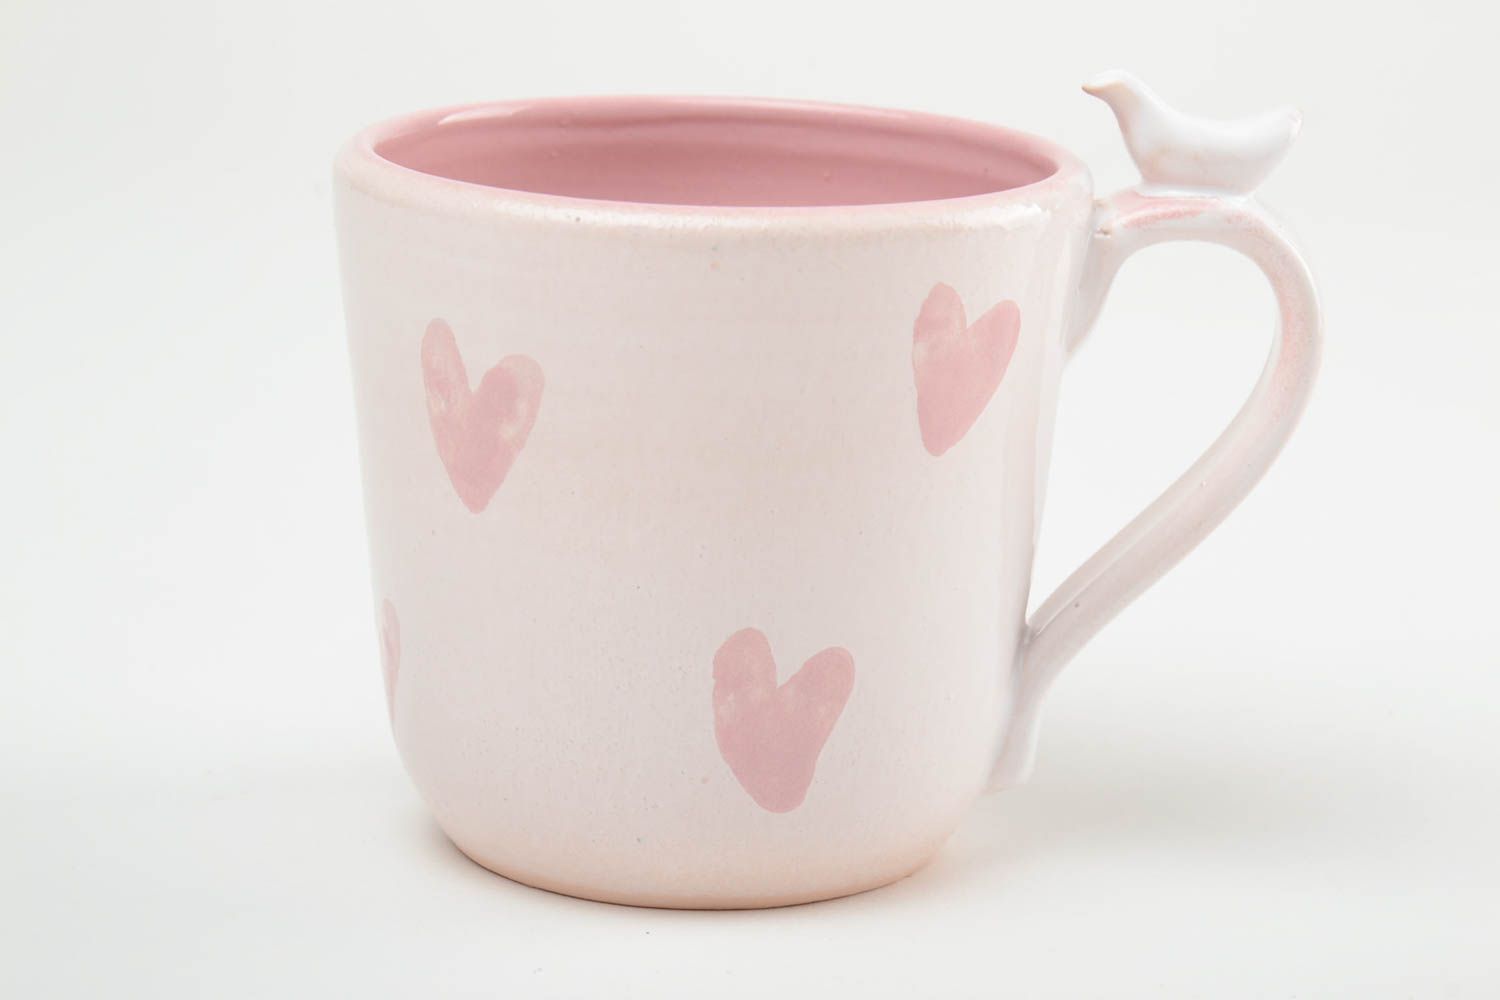 10 oz pink glaze ceramic cup with hearts pattern and bird on the handle photo 3